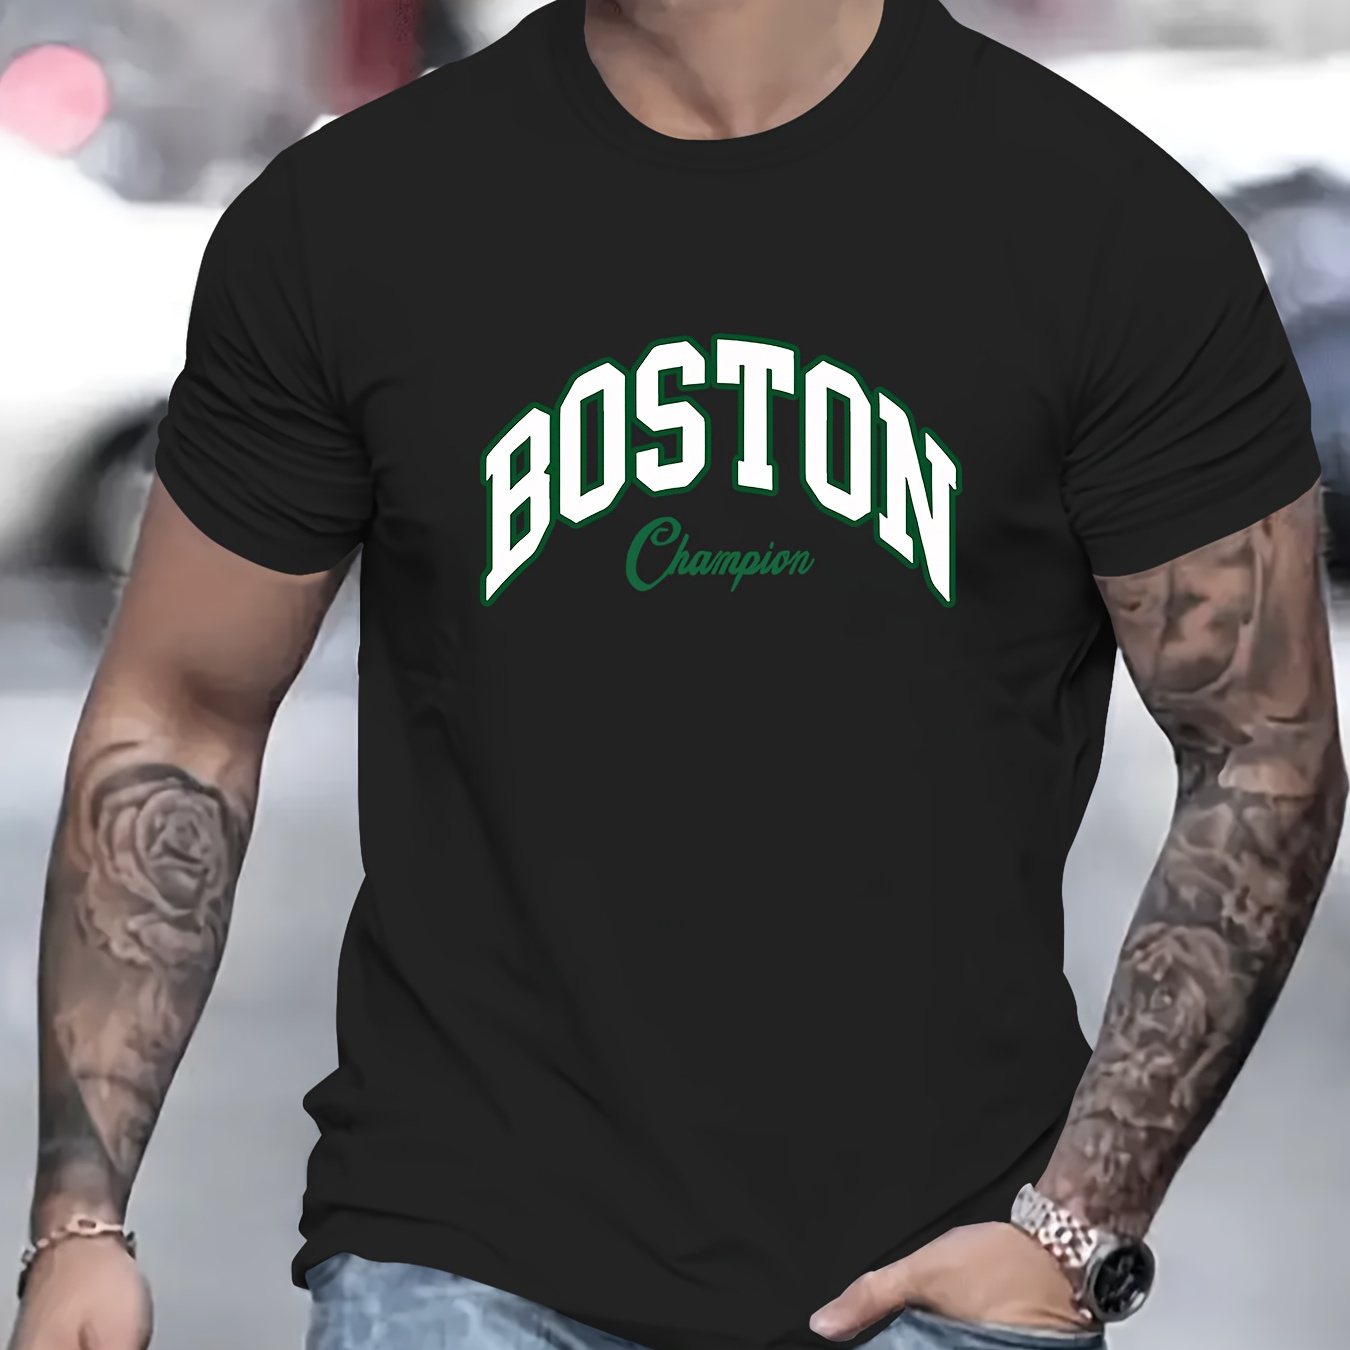 

Boston Alphabet Print Crew Neck Short Sleeve T-shirt For Men, Casual Summer T-shirt For Daily Wear And Vacation Resorts